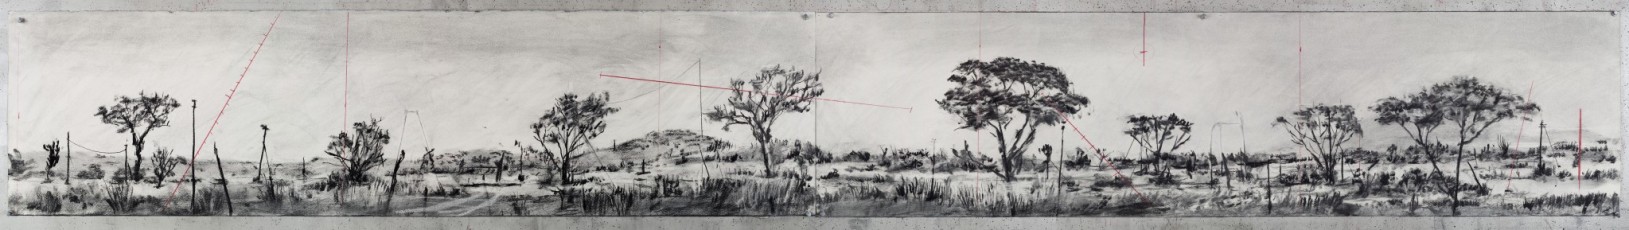 <div class="lightbox-artworktitle">Drawing for The Head & the Load (Landscape with Trees)</div><div class="lightbox-artworkyear">2018</div><div class="lightbox-artworkdescription">Charcoal and red pencil on paper</div><div class="lightbox-artworkdimension">40 x 320 cm</div><div class="lightbox-artworkdimension"></div><div class="lightbox-tagswithlinks"><a rel='nofollow' href='/page/1/?s=%23Charcoal'>#Charcoal</A> <a rel='nofollow' href='/page/1/?s=%23Paper'>#Paper</A> <a rel='nofollow' href='/page/1/?s=%23TheHead&TheLoad'>#TheHead&TheLoad</A> <a rel='nofollow' href='/page/1/?s=%23ColouredPencil'>#ColouredPencil</A></div>